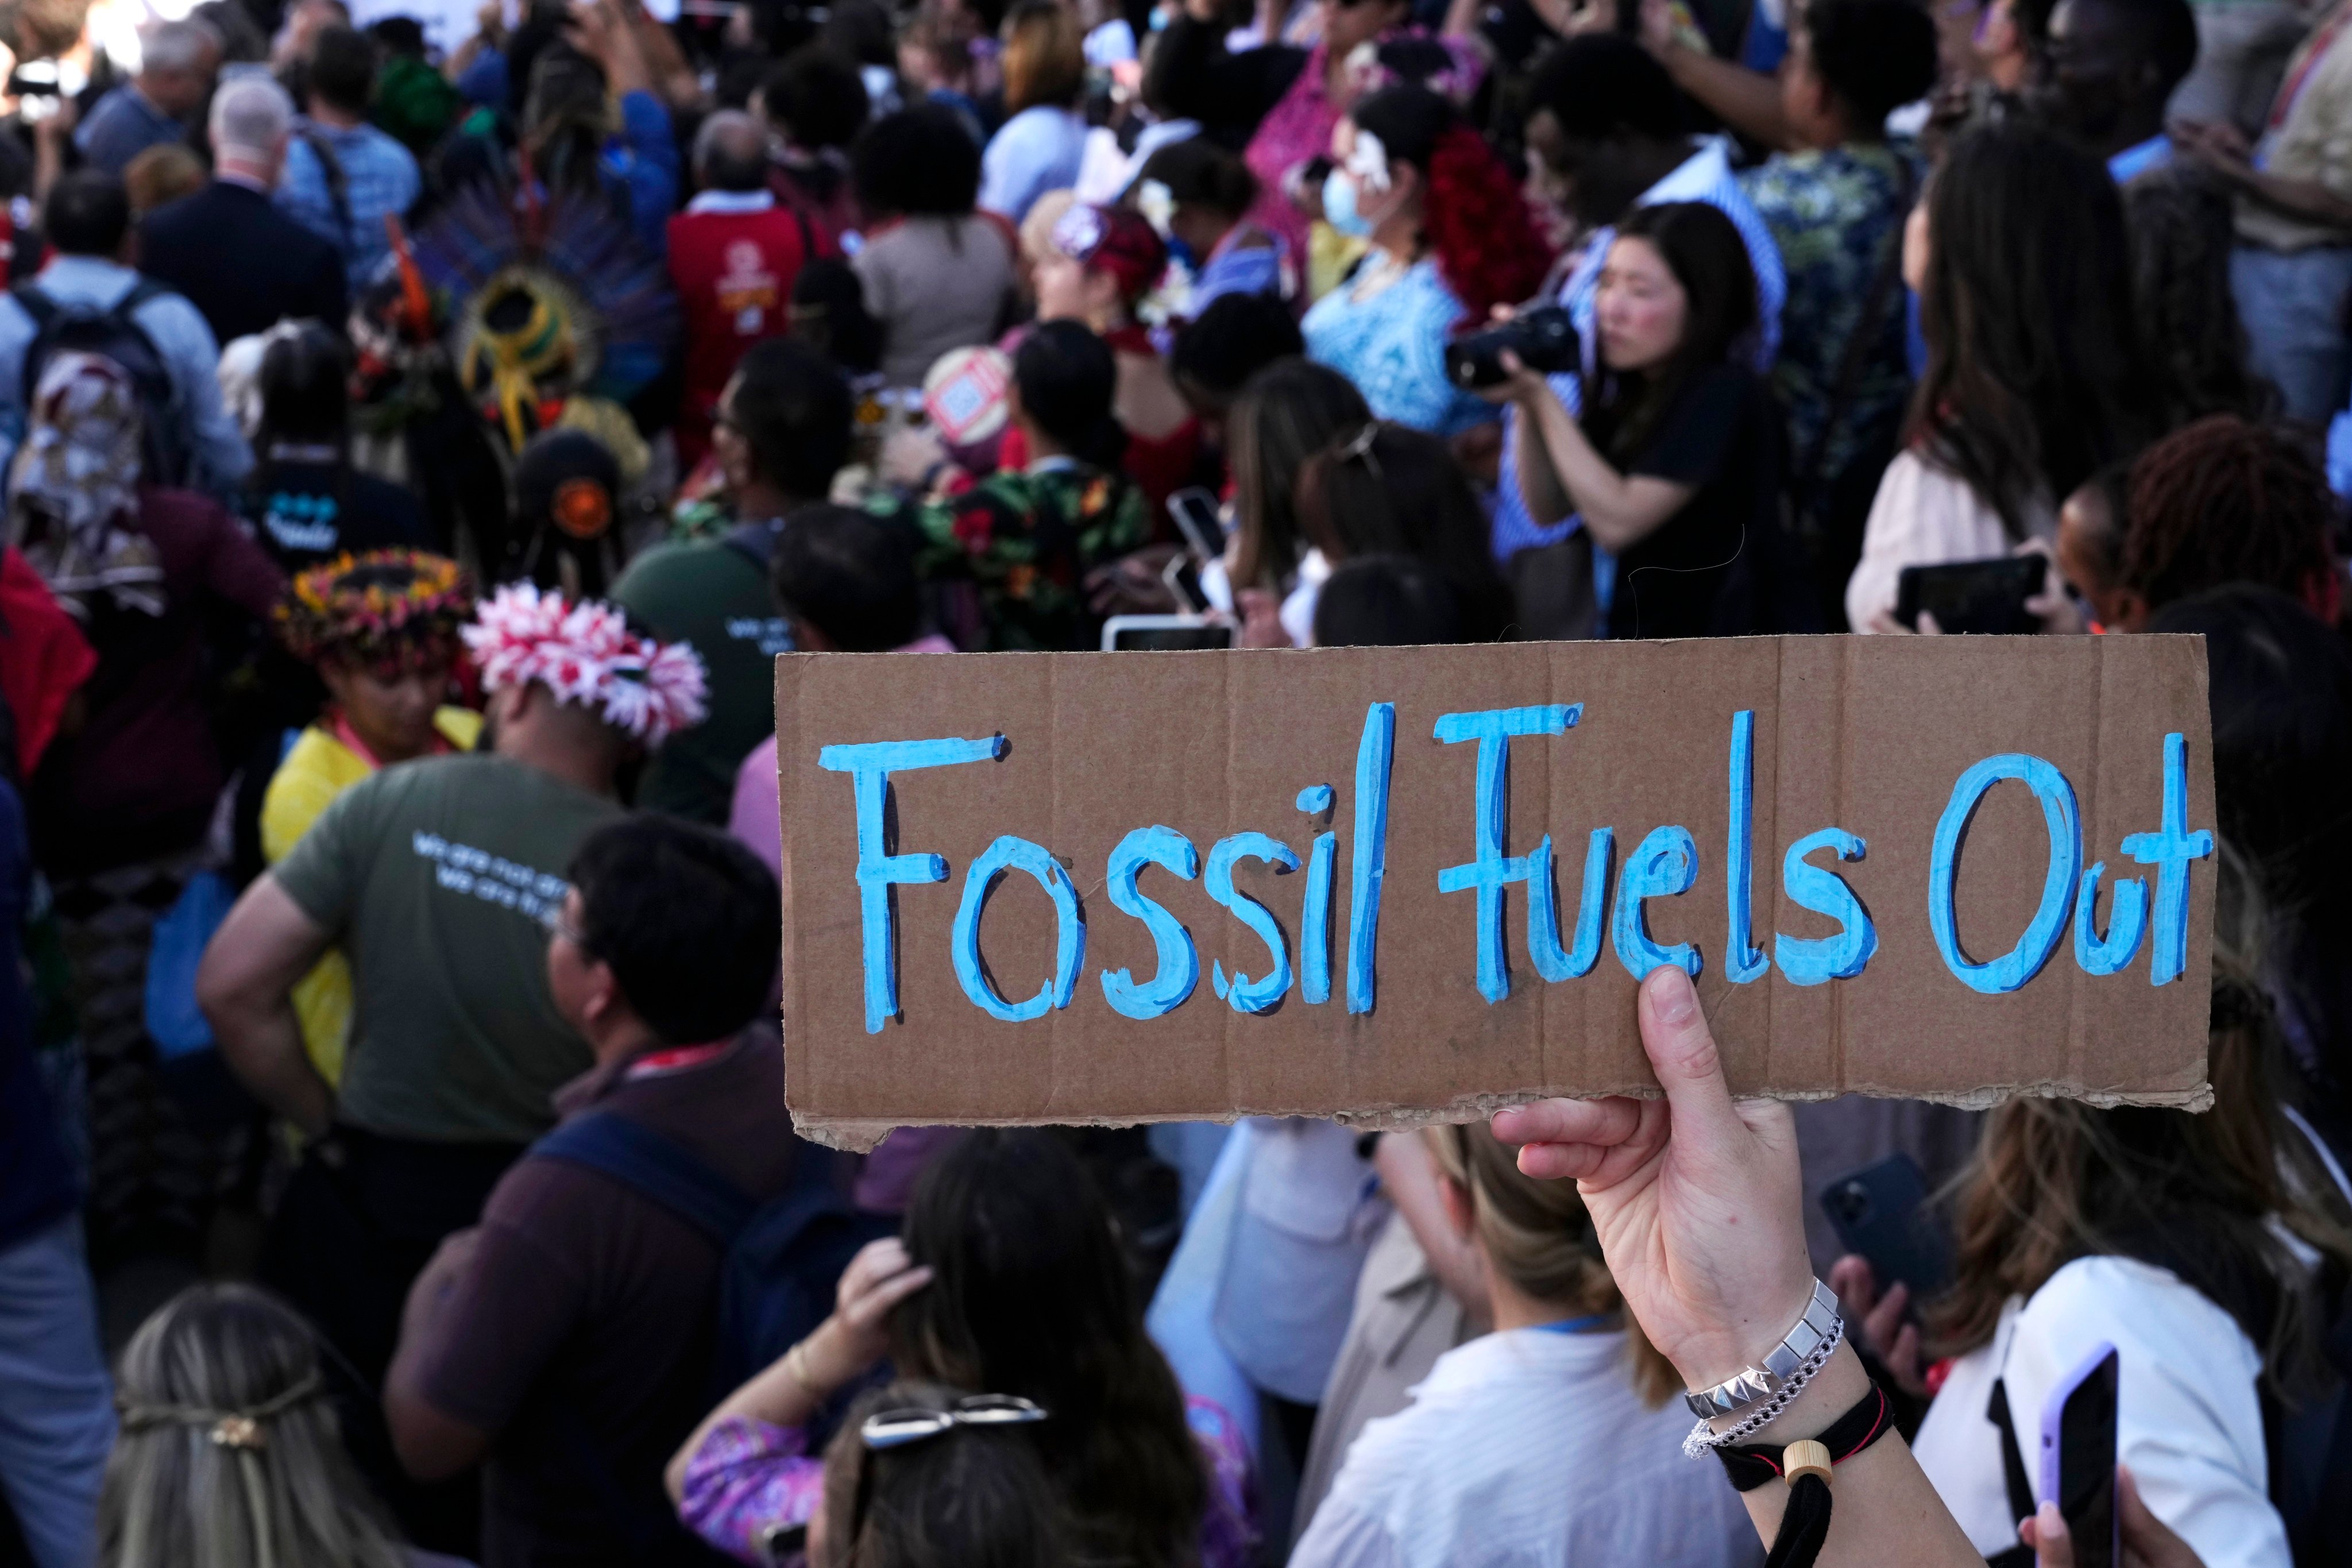 A sign reading “fossil fuels out” is displayed during a demonstration at COP27 on November 12 in Sharm el-Sheikh, Egypt. Simon Stiell, UN climate chief, acknowledges nations didn’t do anything additional to address climate change itself at the meeting. Photo: AP